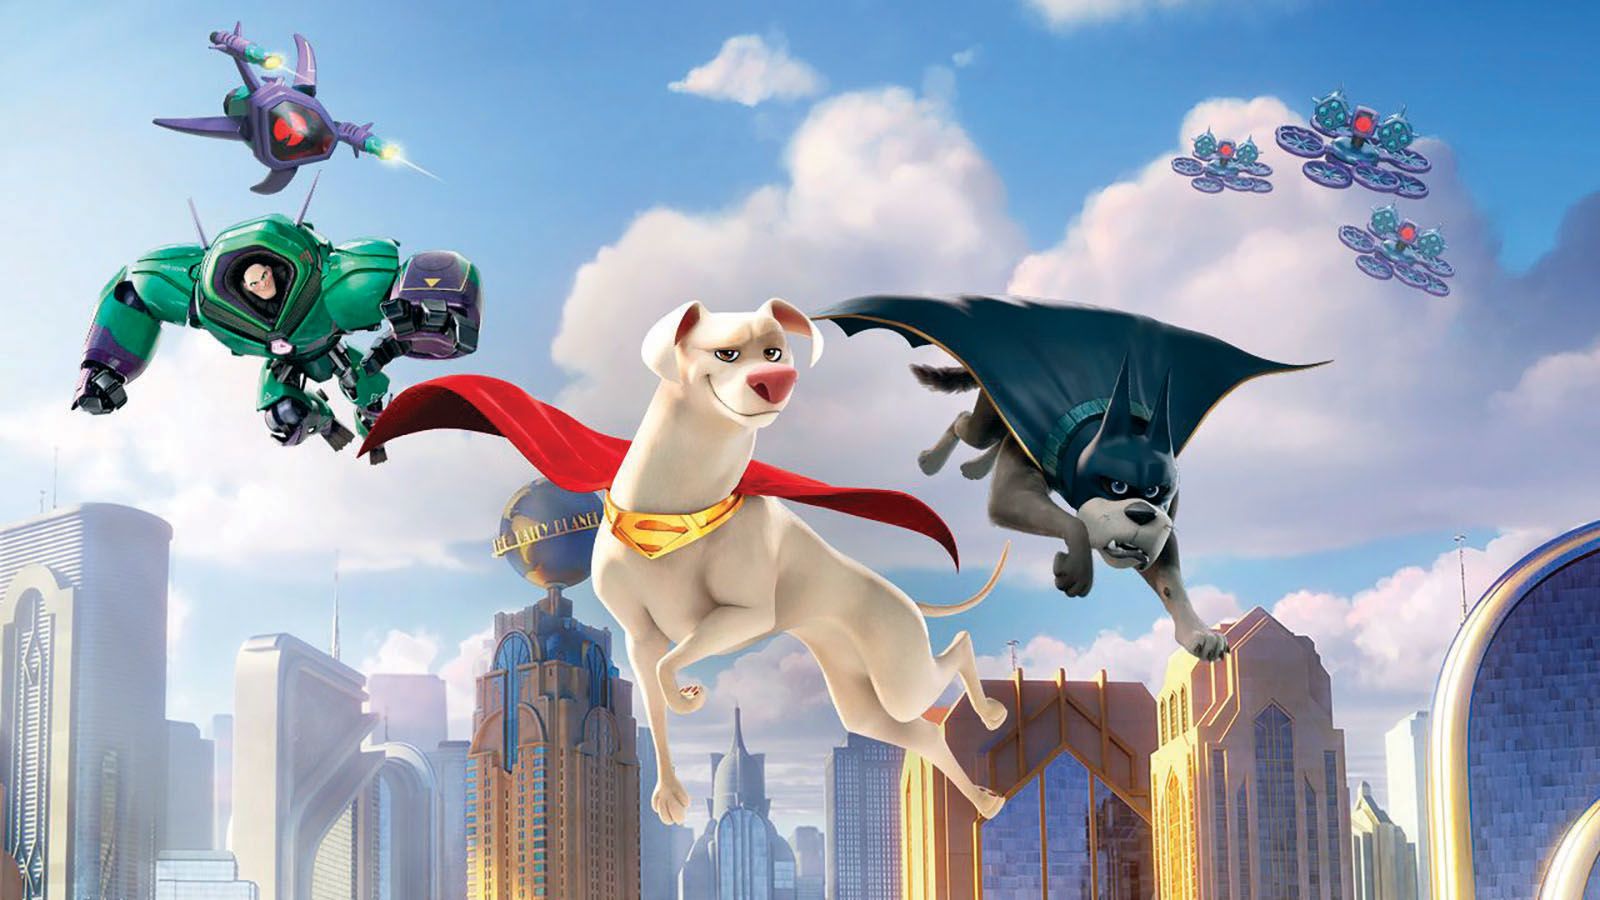 DC League of Super-Pets topped last weekend's box office.